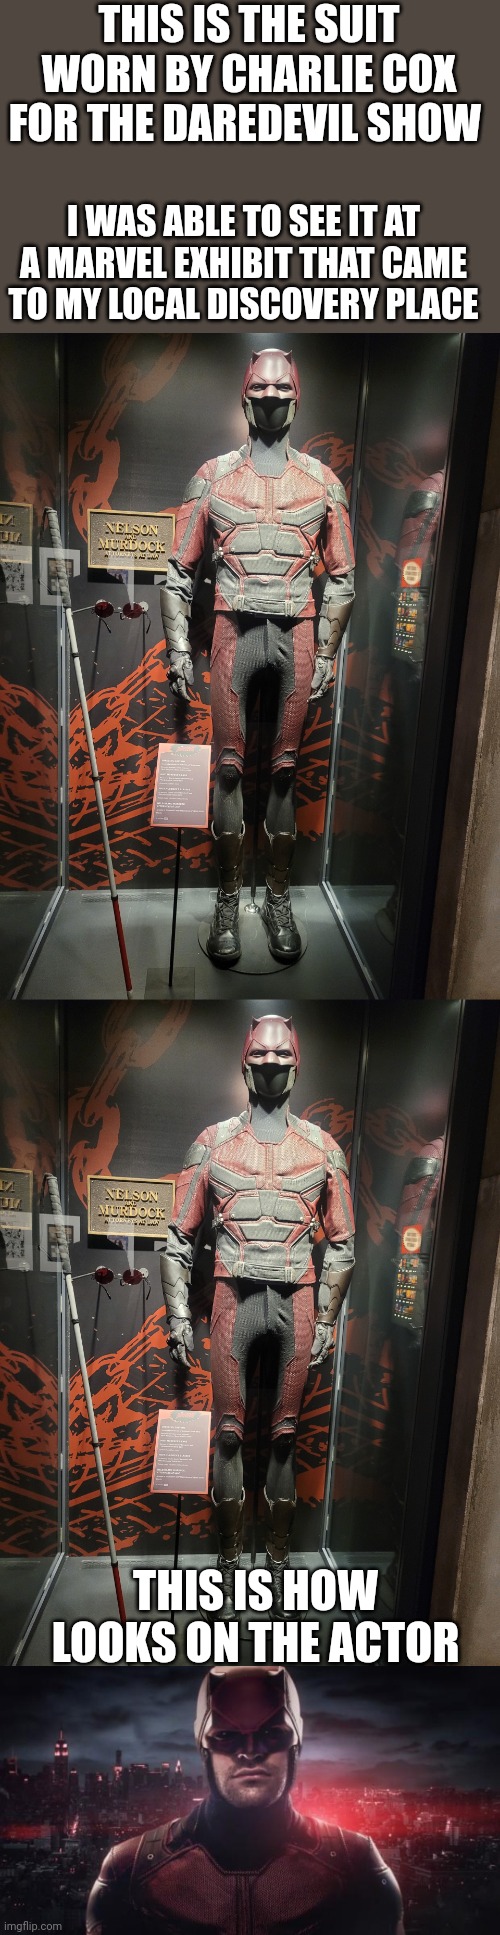 I forgot I had these pictures ☠️ | THIS IS THE SUIT WORN BY CHARLIE COX FOR THE DAREDEVIL SHOW; I WAS ABLE TO SEE IT AT A MARVEL EXHIBIT THAT CAME TO MY LOCAL DISCOVERY PLACE; THIS IS HOW LOOKS ON THE ACTOR | image tagged in daredevil | made w/ Imgflip meme maker